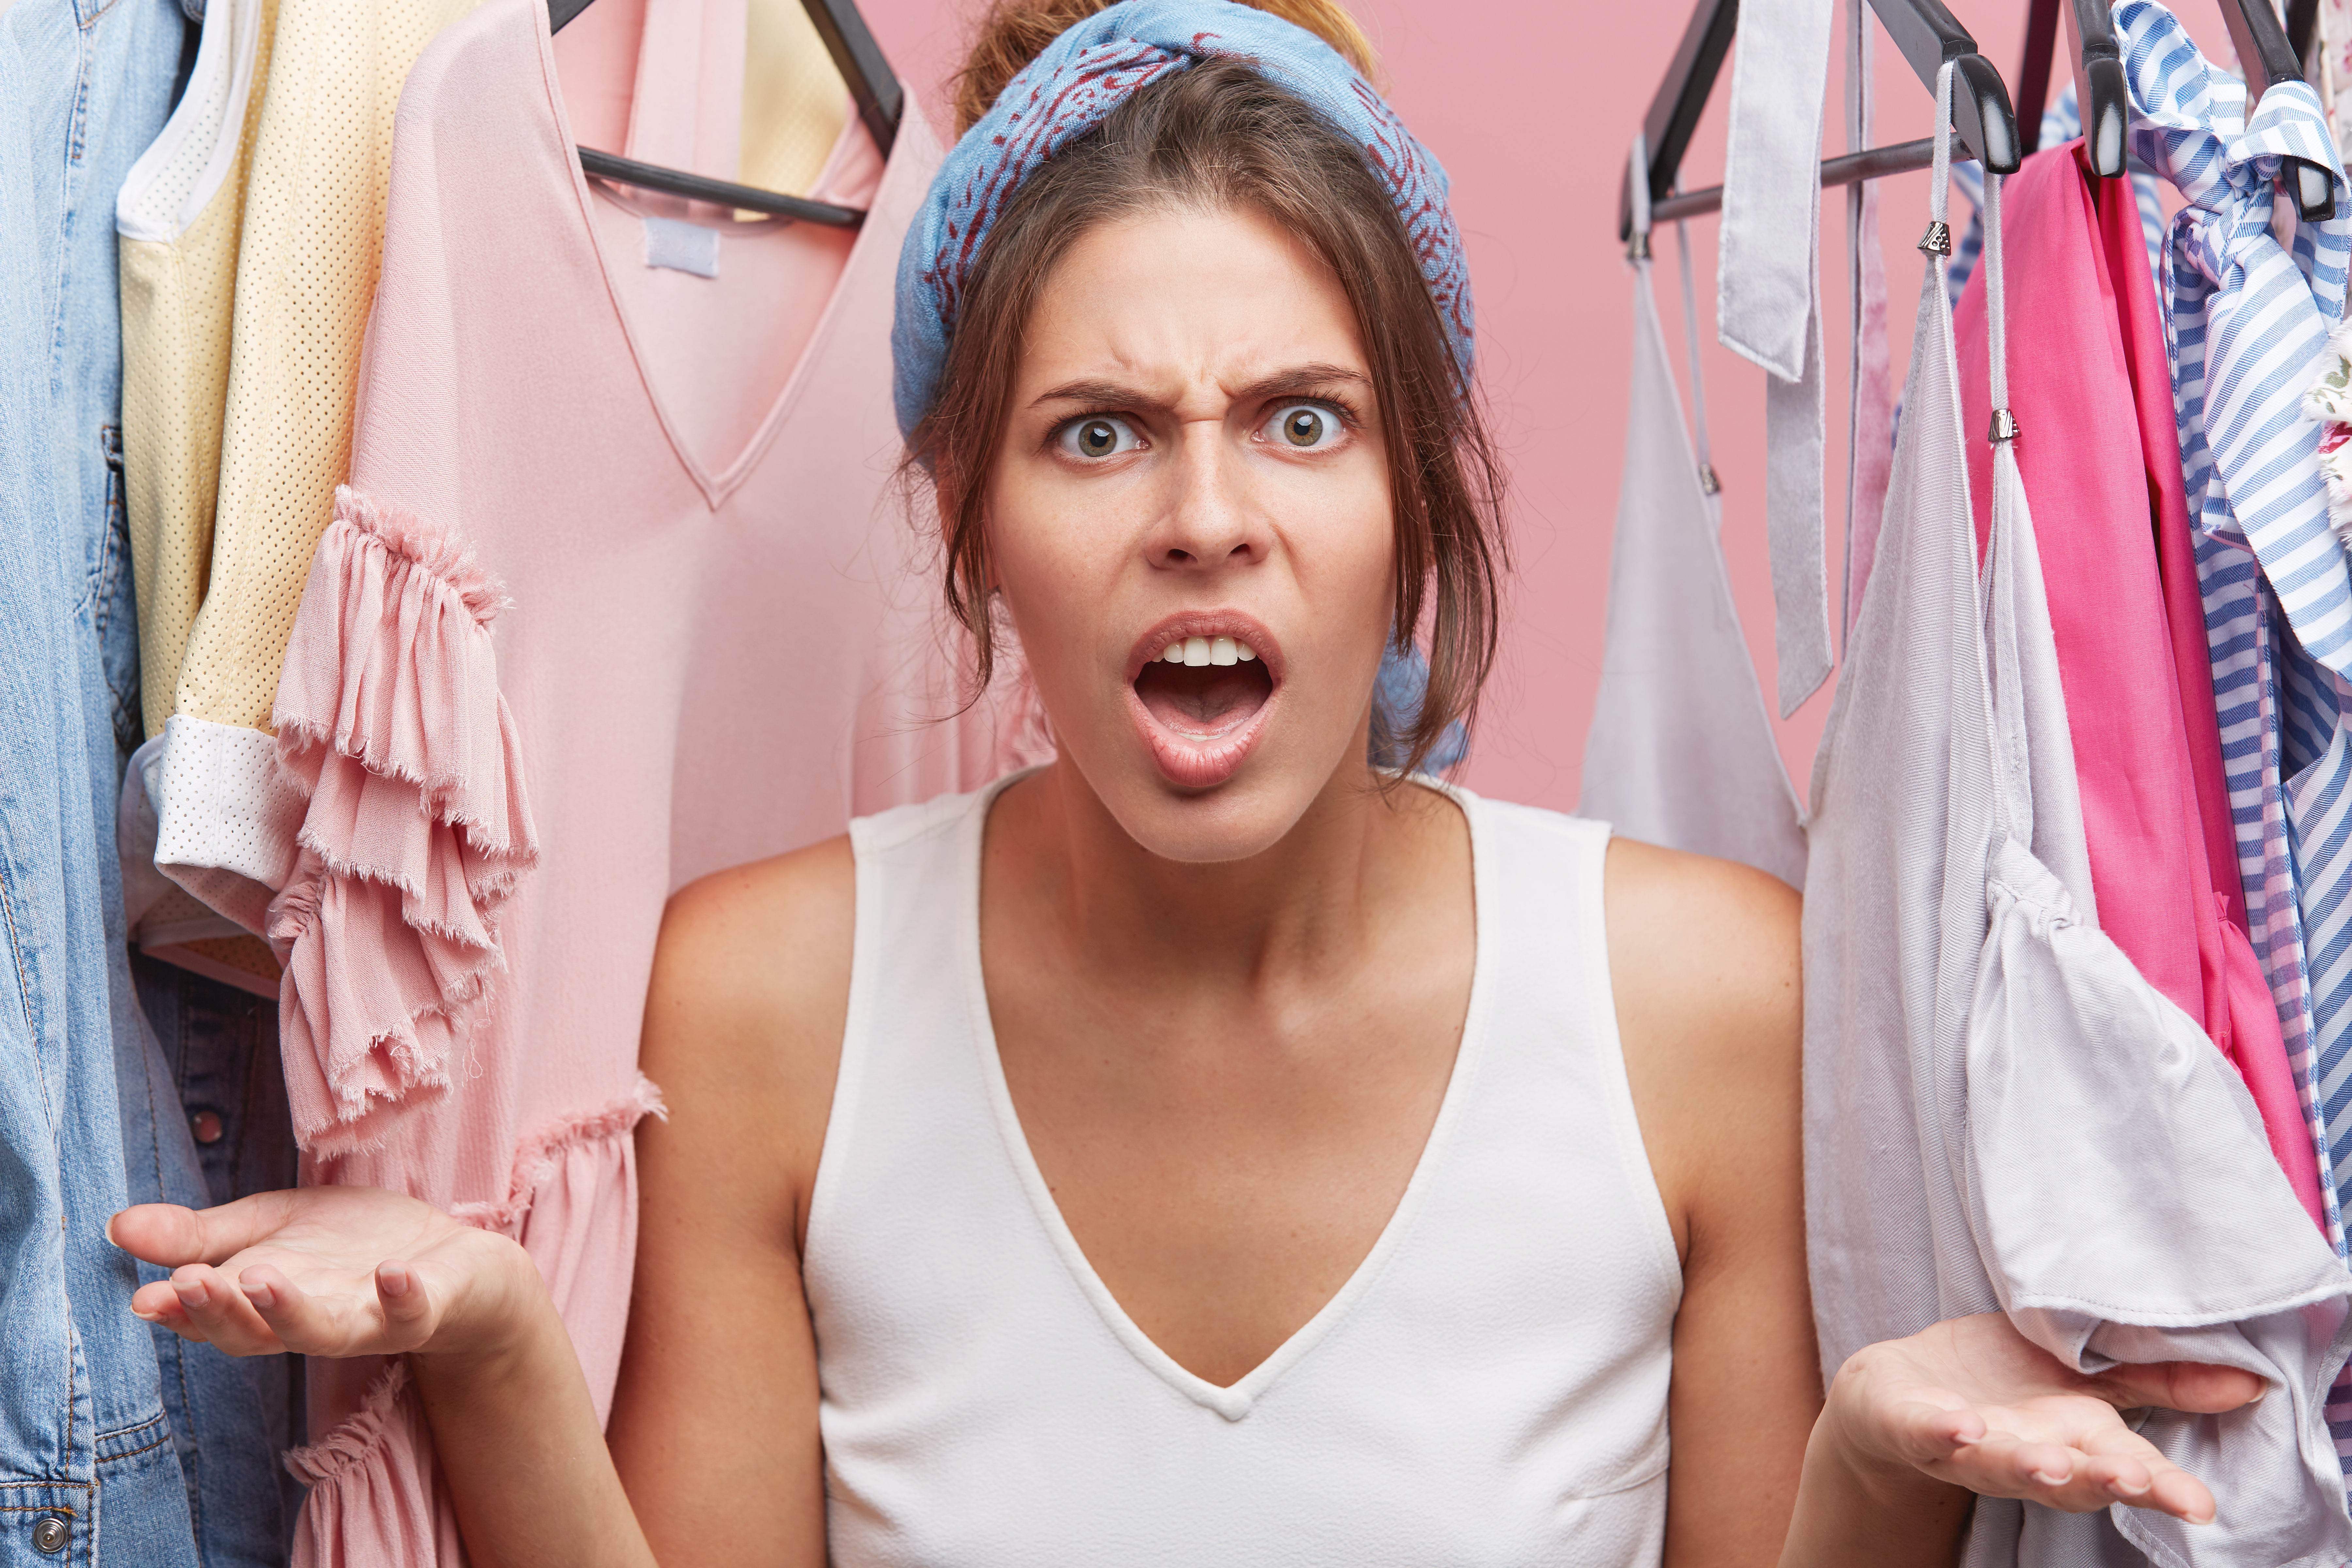 Woman furious as she stands in the midst of clothing | Source: Freepik